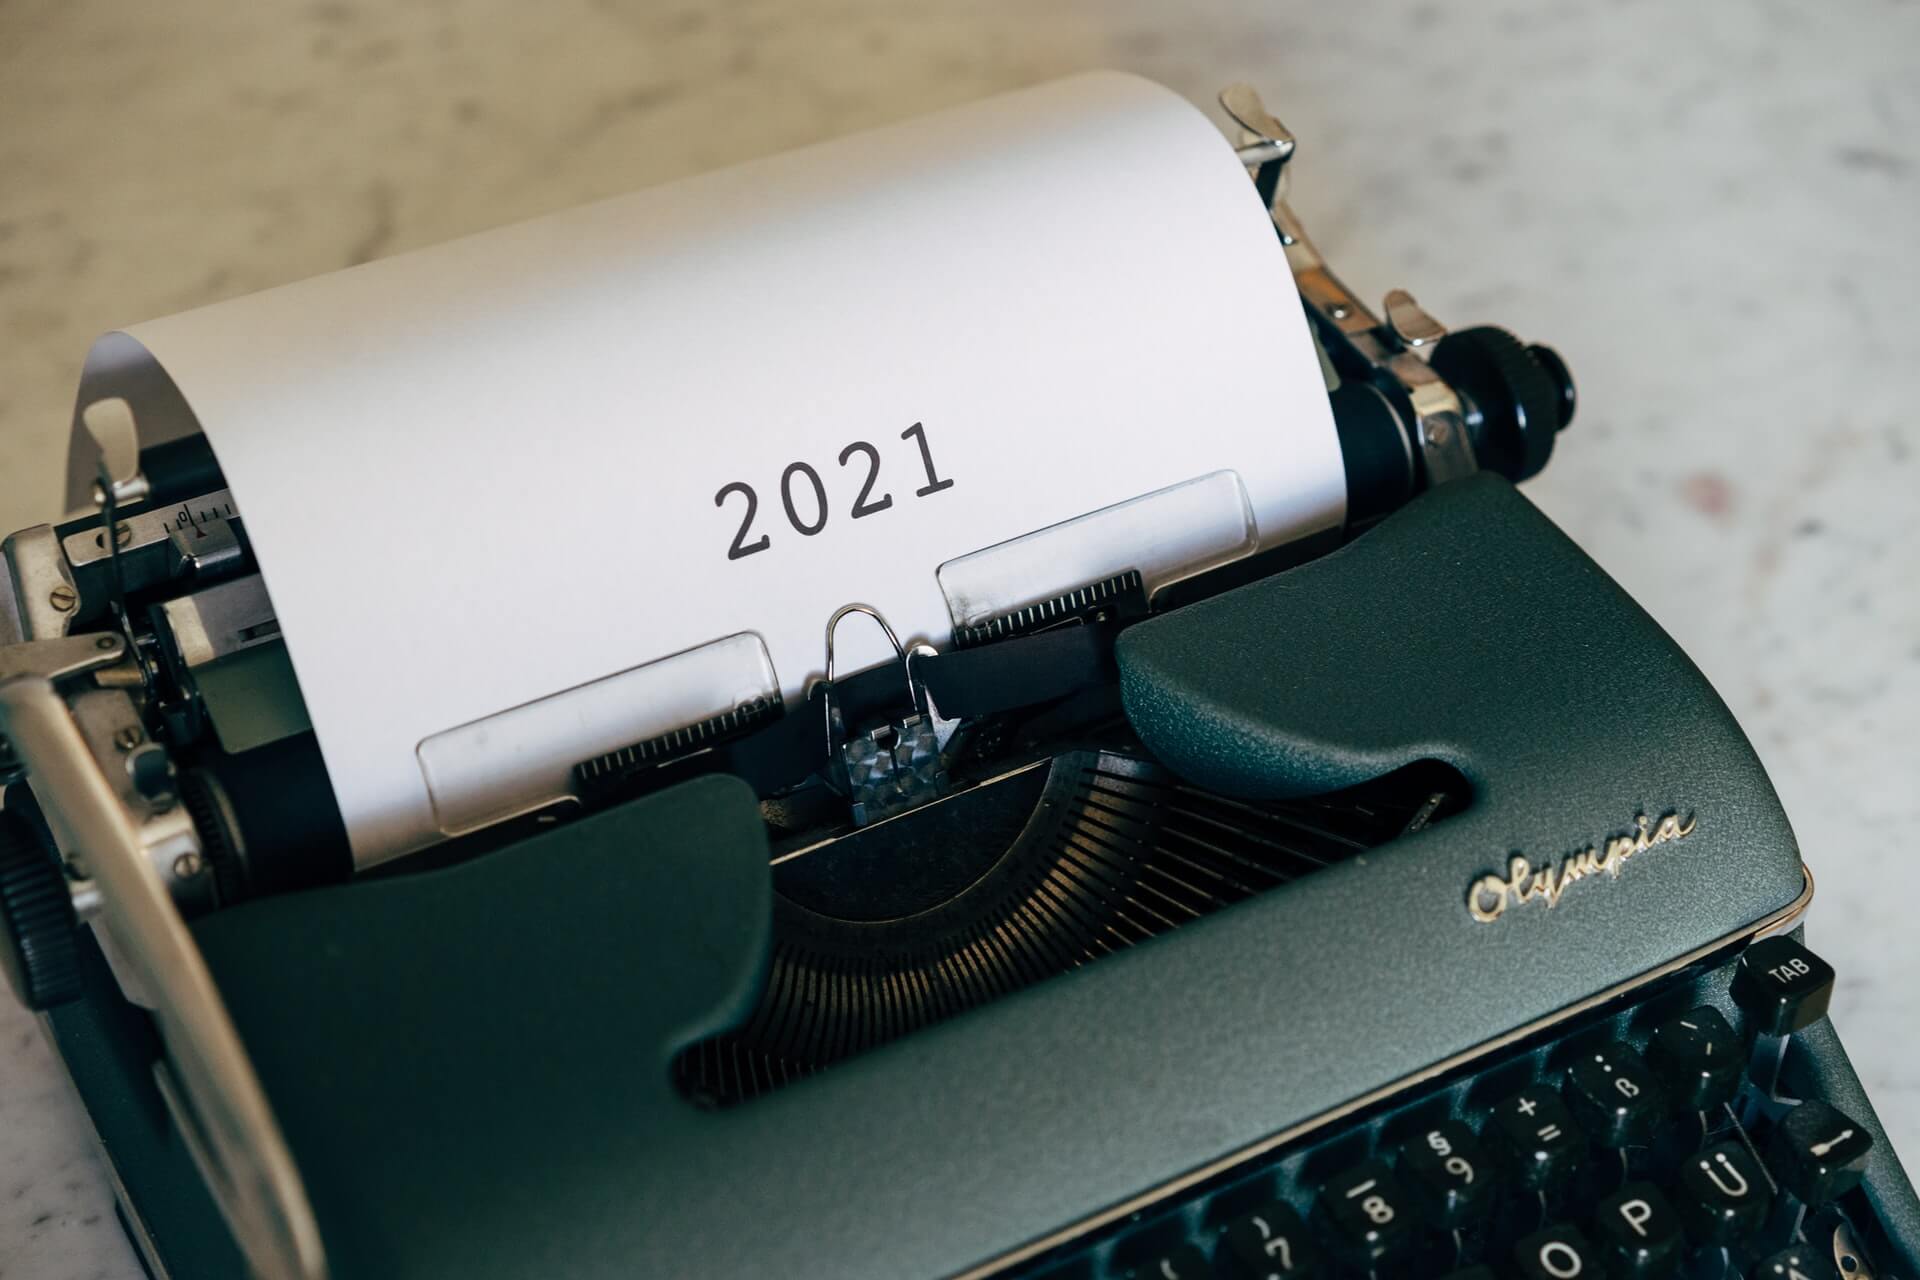 Page in Olympia typewriter with "2021" typed onto it